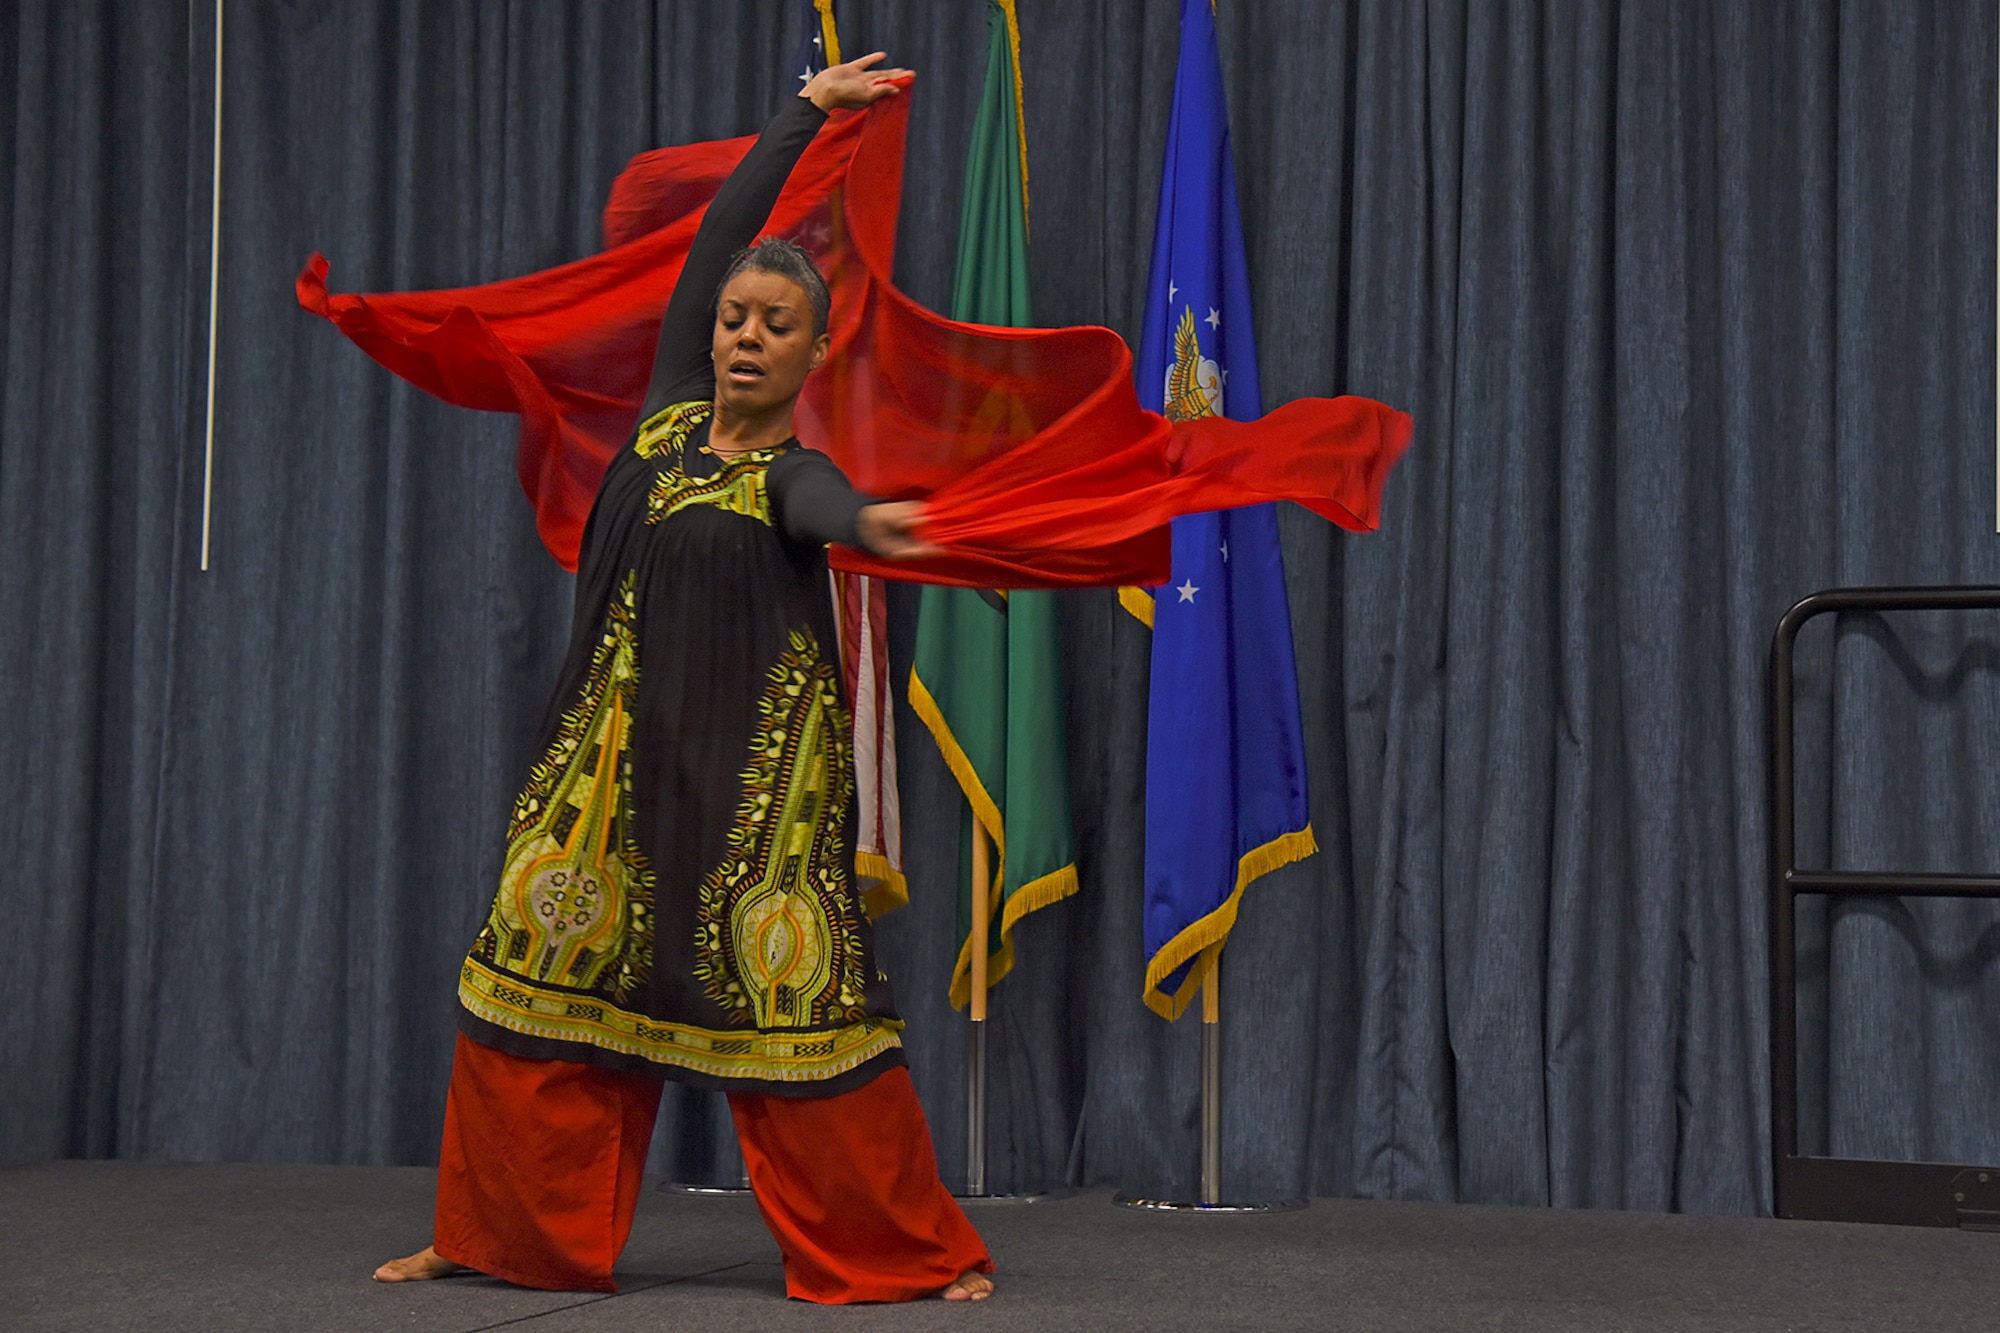 Mona Martin performs a South African tribal dance during the National Black History Month luncheon Feb. 23, 2017, at Fairchild Air Force Base, Washington. The dance performed was based on the original culture musical and movement styles. A tribal dance is a type of dance used to symbolize the origin of one's connection with their culture. (U.S. Air Force photo/Senior Airman Mackenzie Richardson)